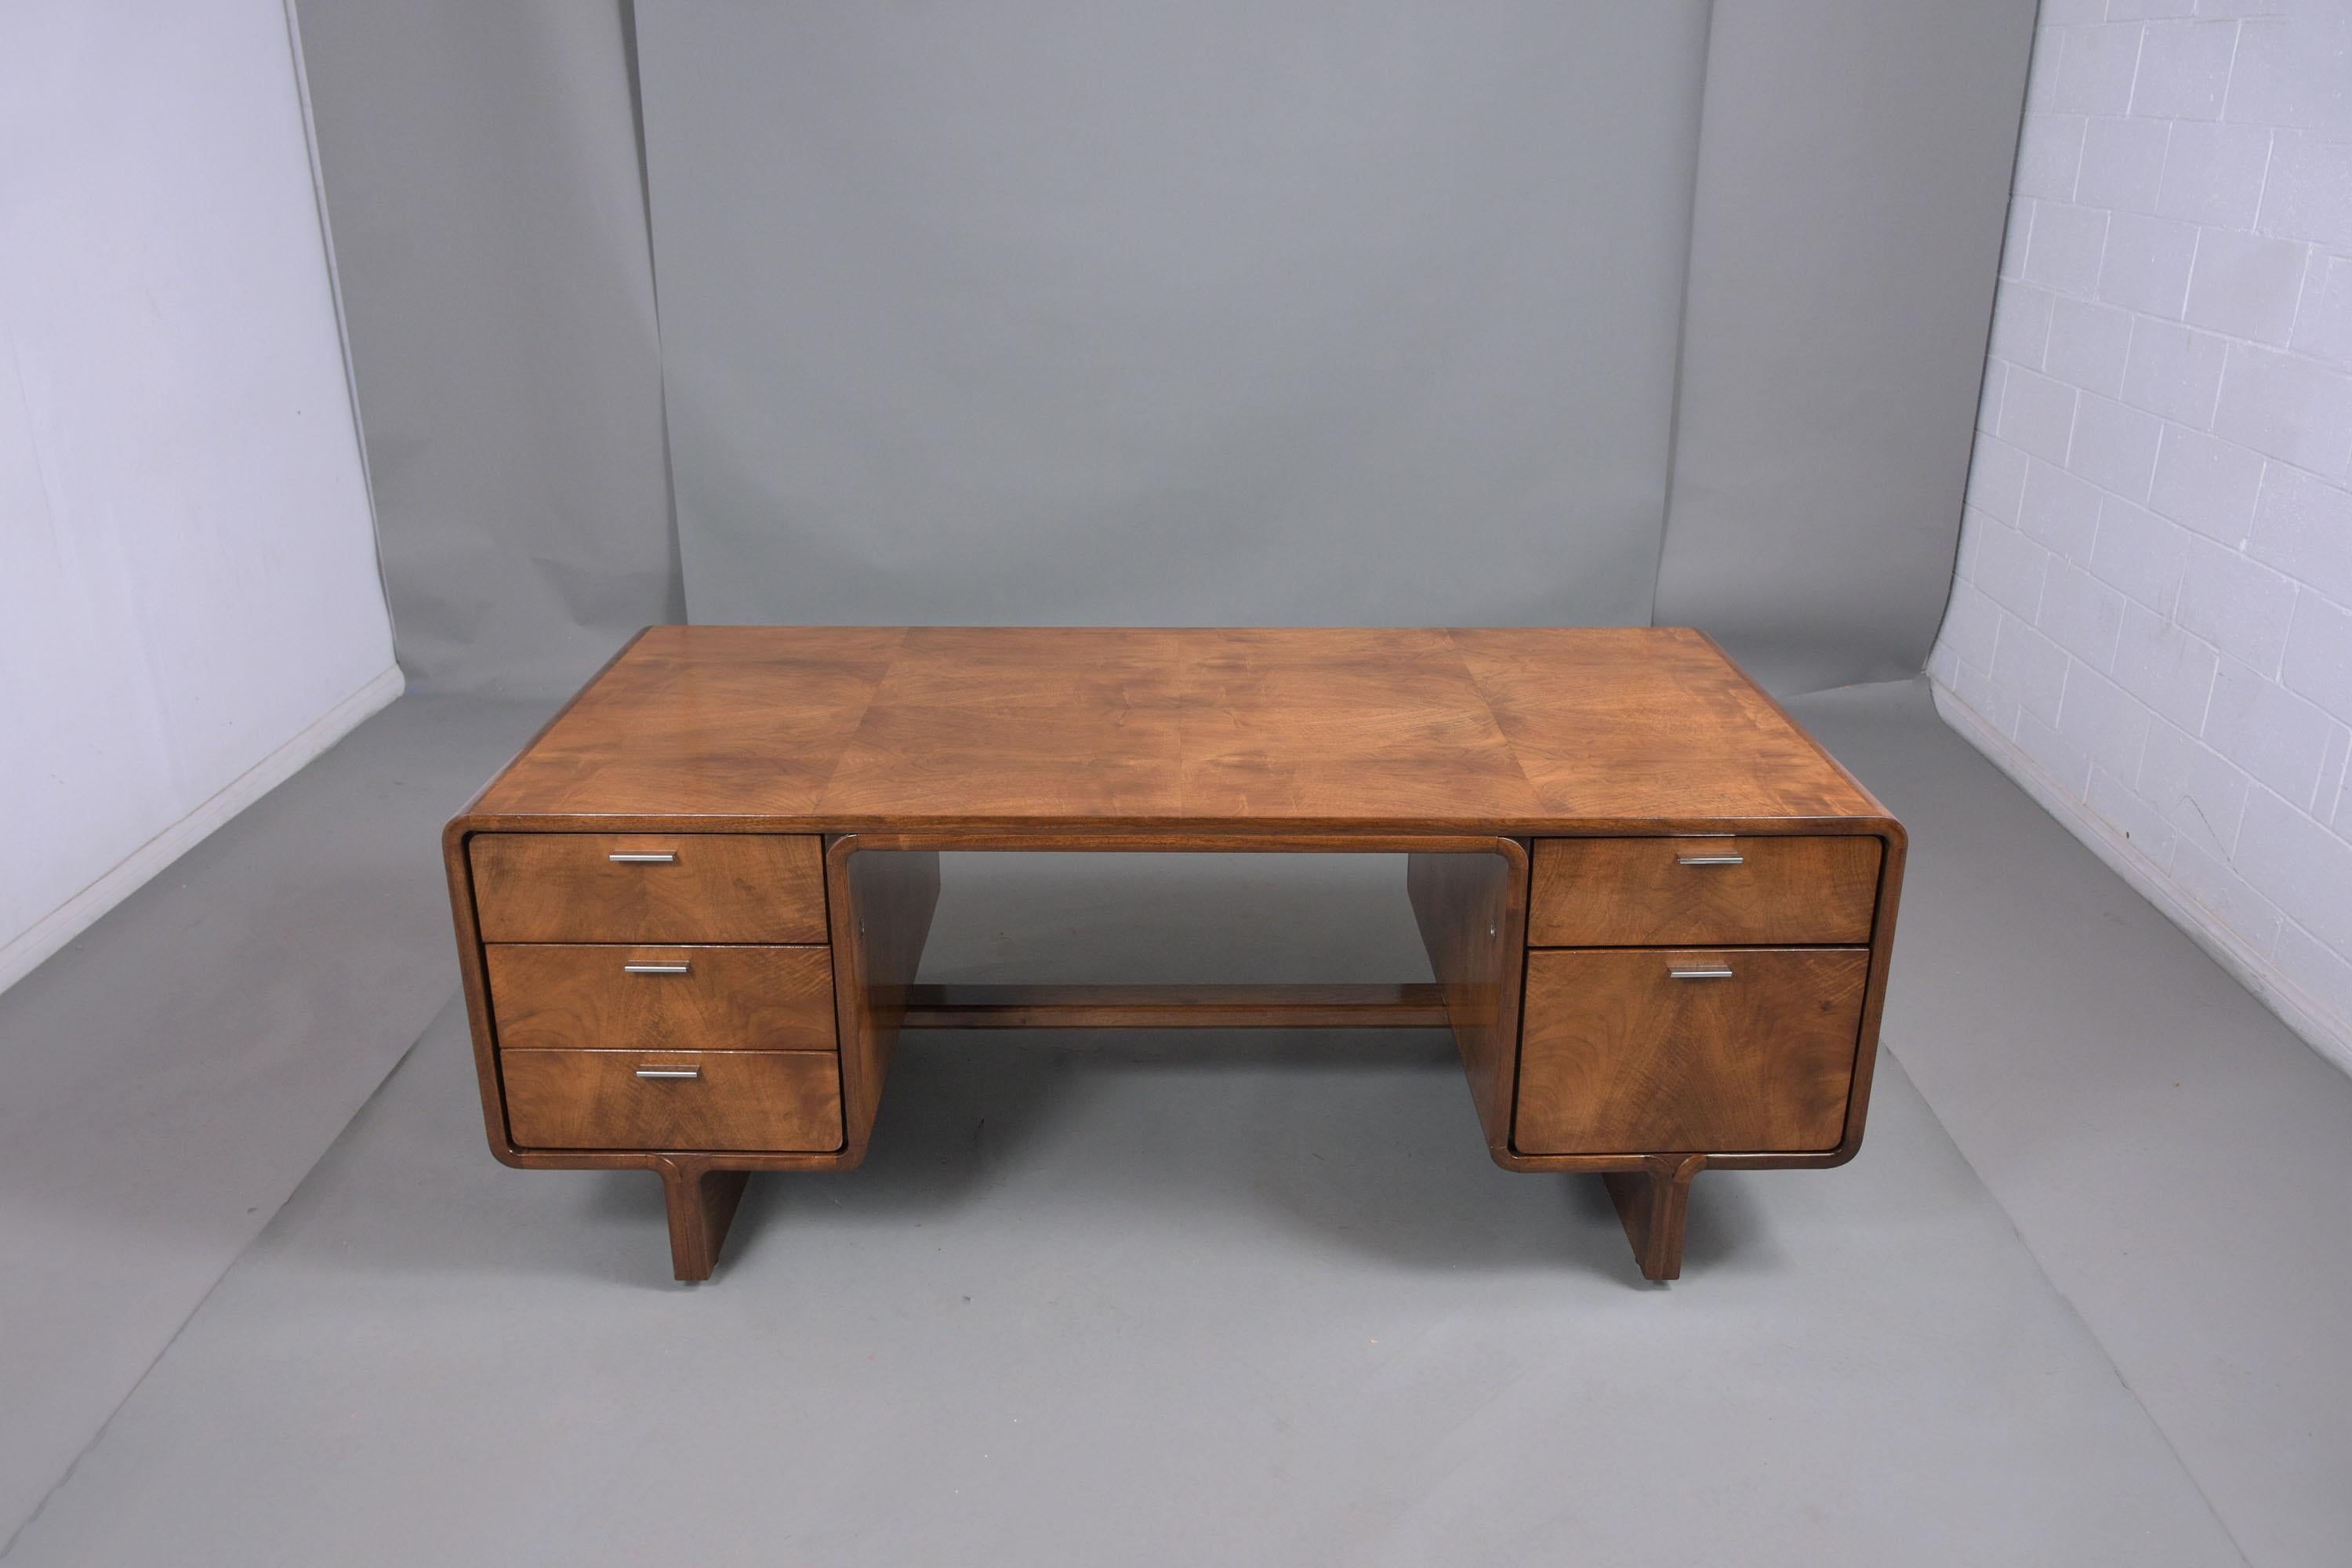 An extraordinary Mid-Century Modern desk hand-crated out of walnut wood newly stained a rich walnut color with a lacquered finish and professionally restored by our team of craftsmen. The desk features a large rectangular top with curved edges is